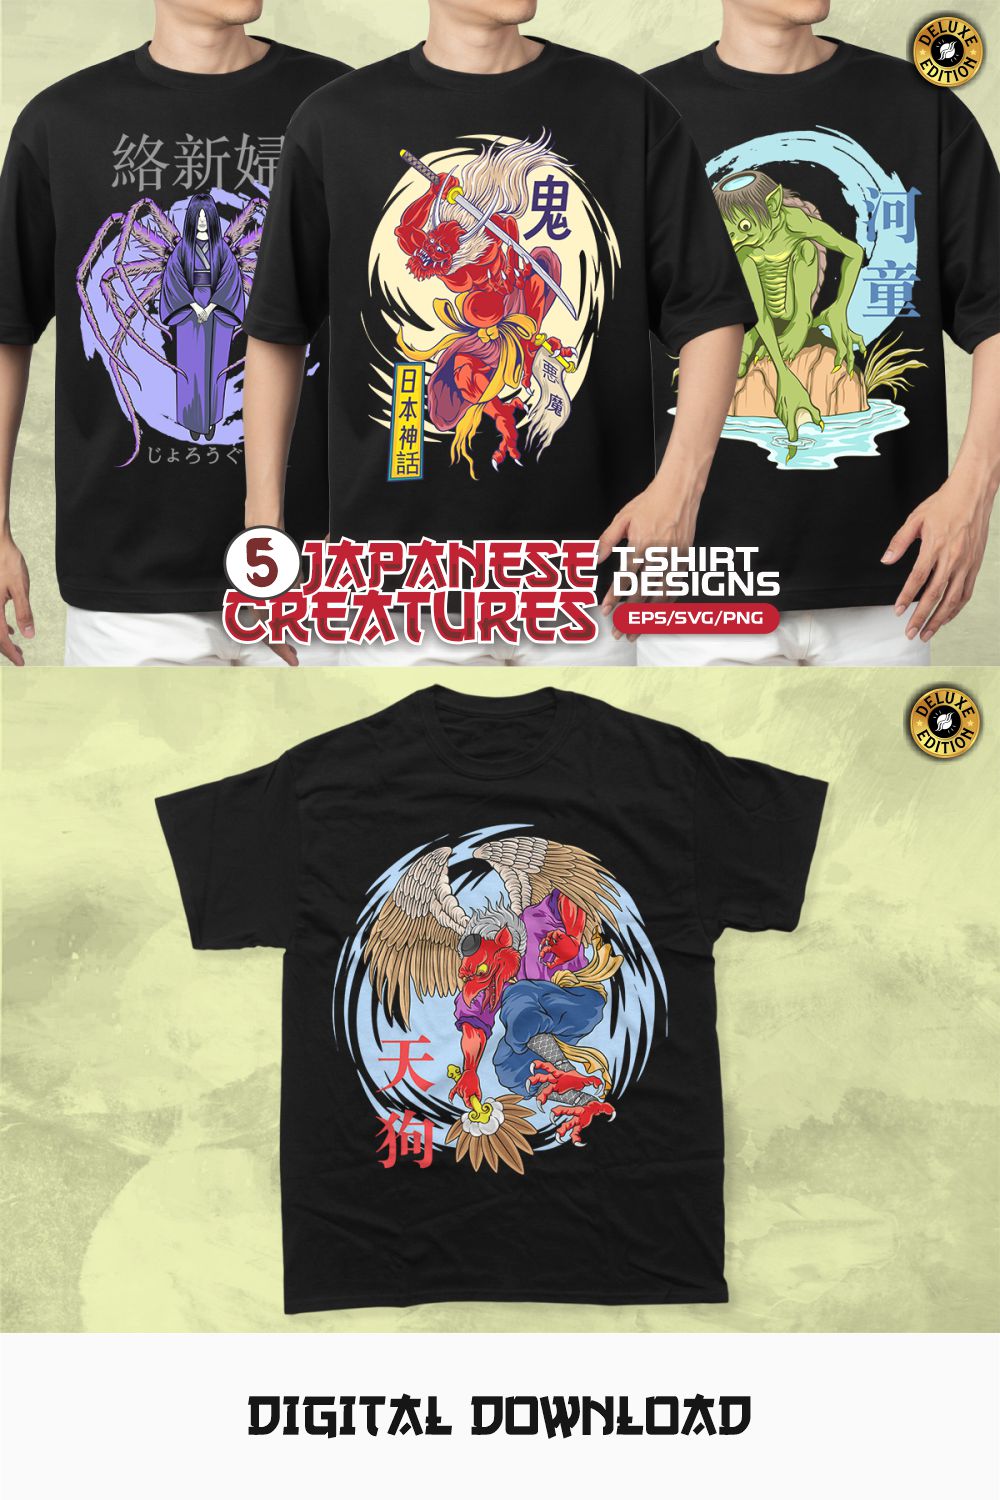 Japanese Creatures T-shirt Designs Bundle Vector and PNG pinterest preview image.